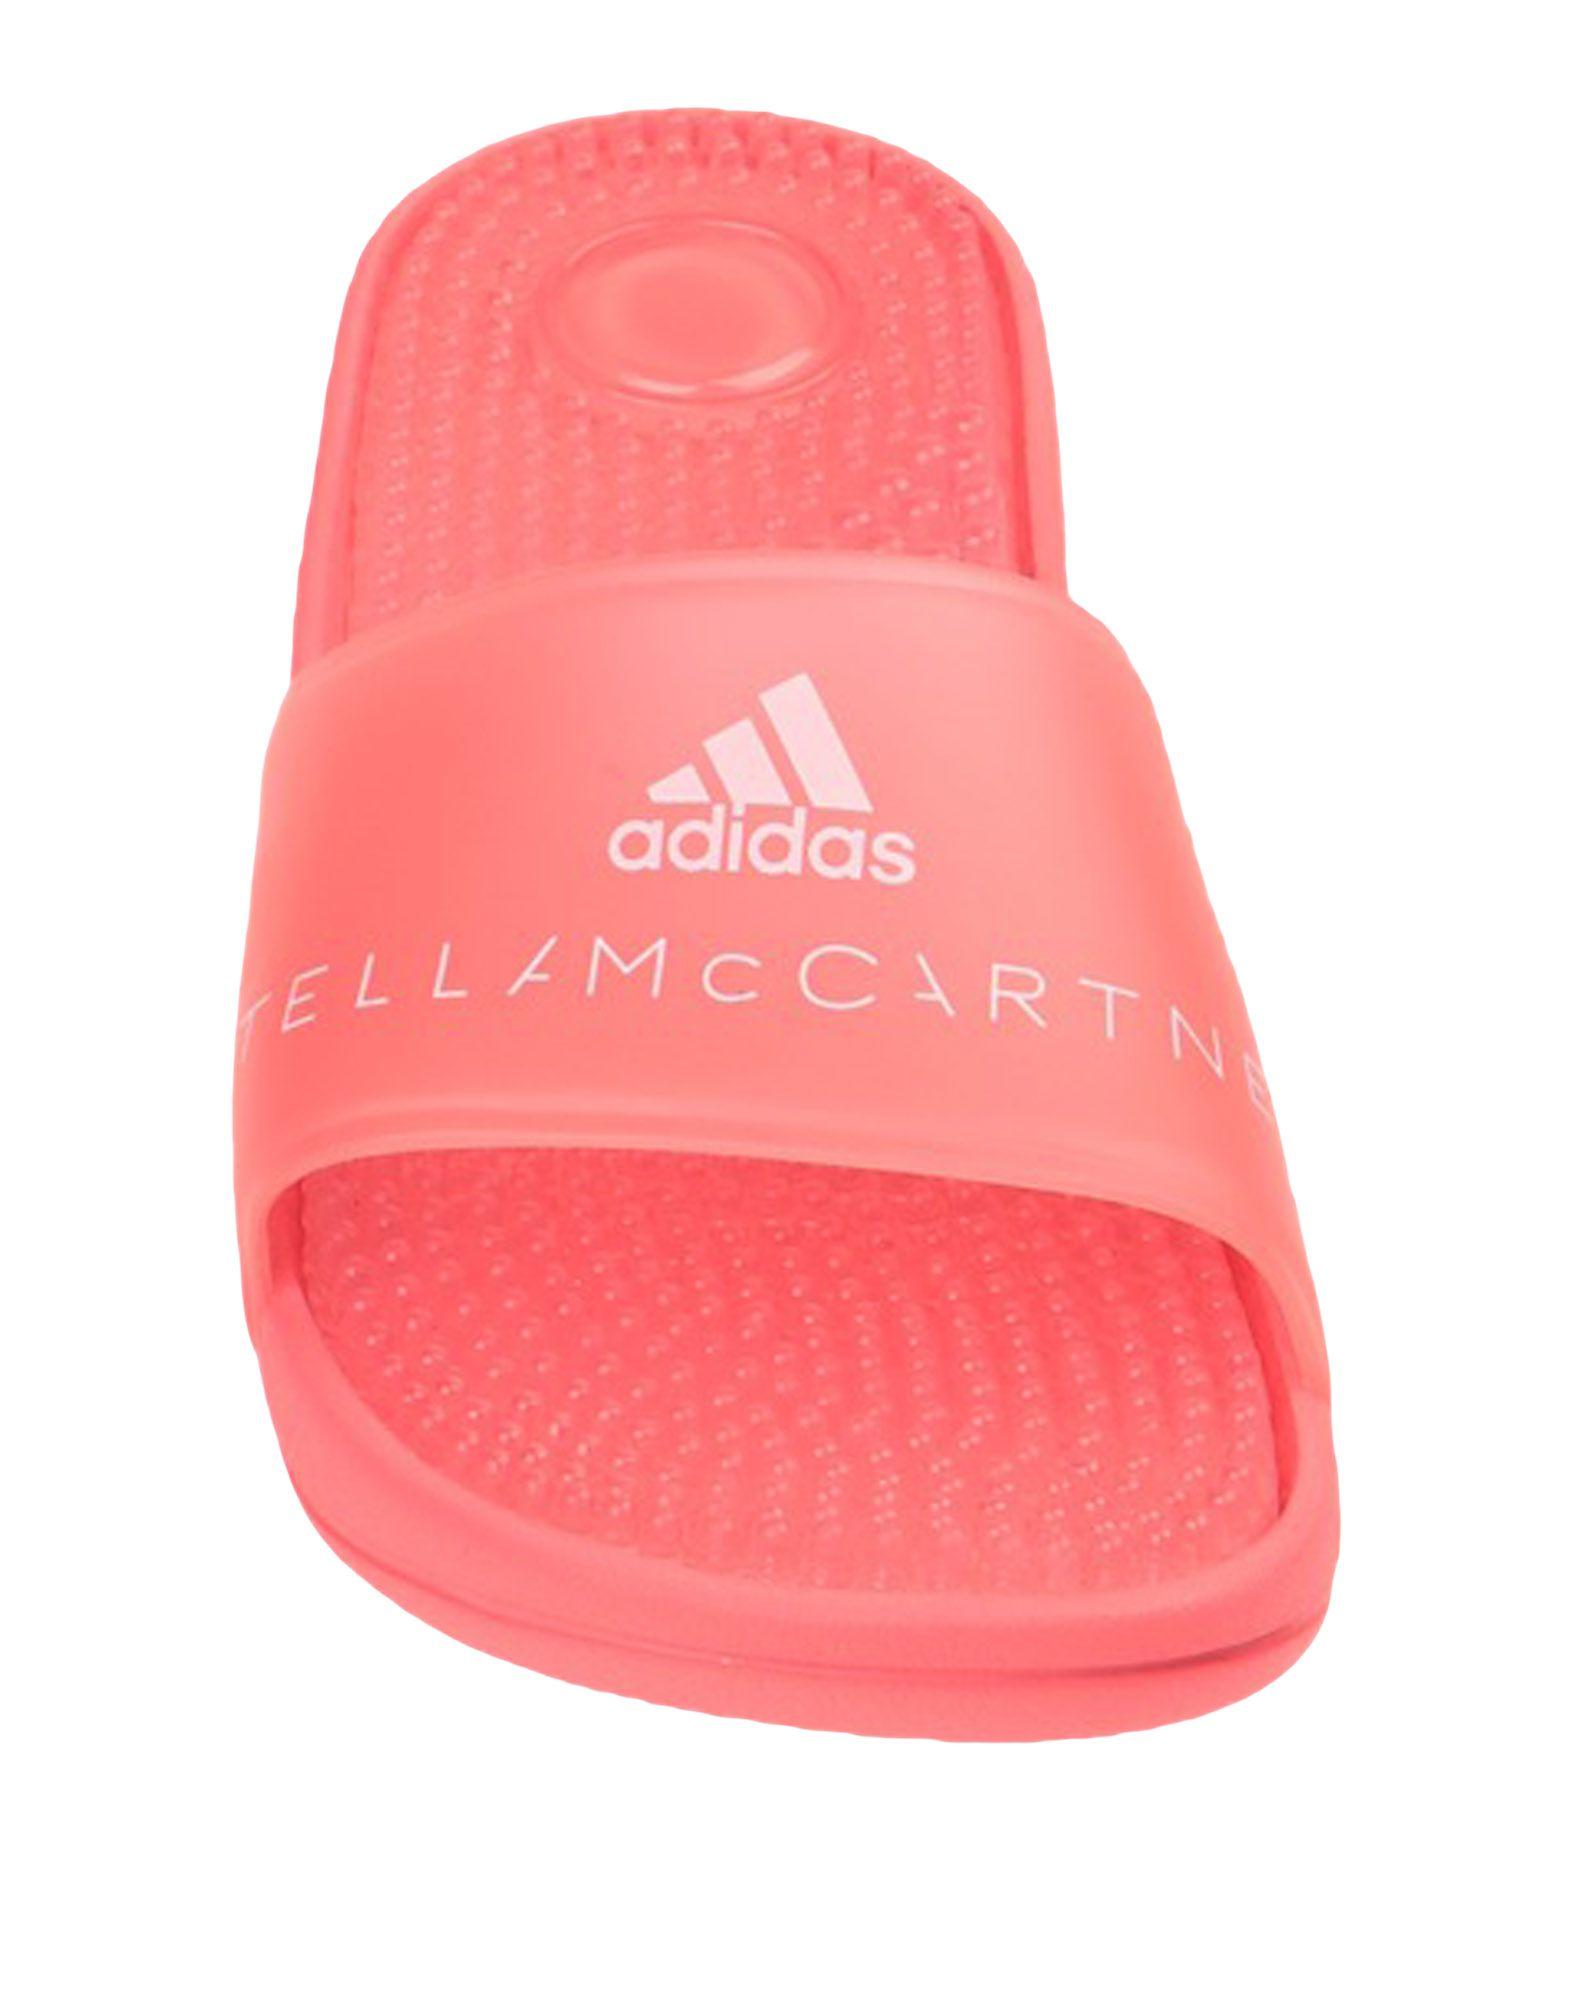 adidas By Stella McCartney Rubber Sandals in Coral (Pink) - Lyst